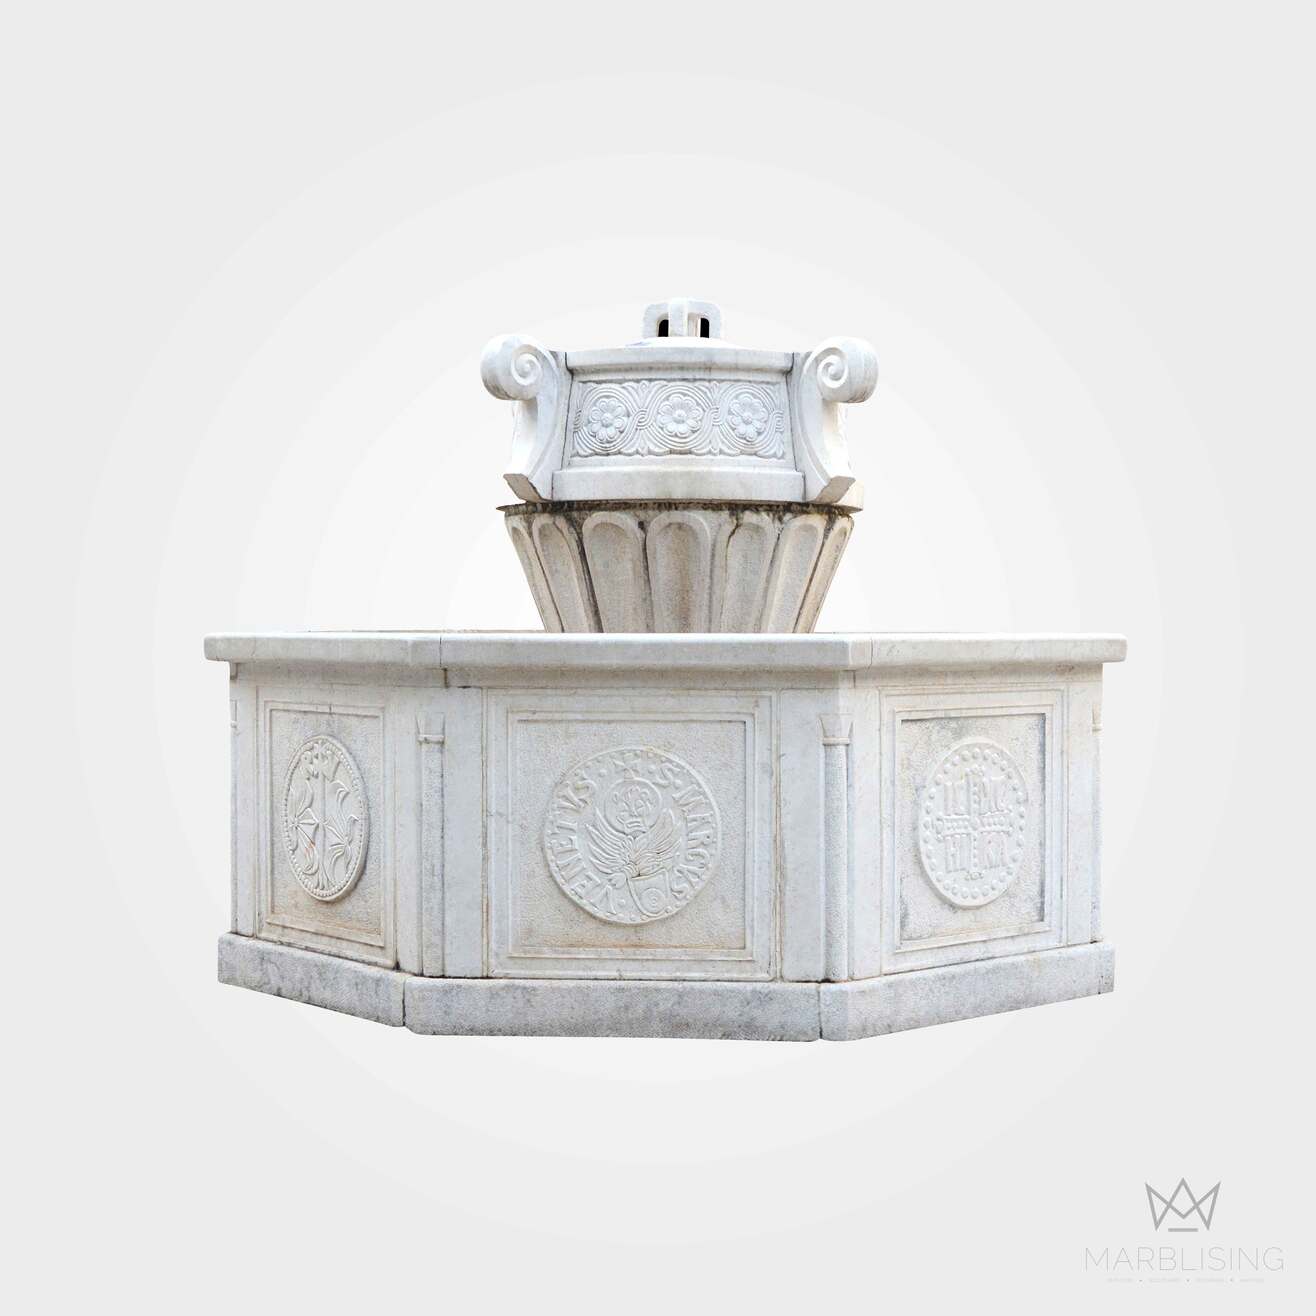 Legend Fountain with Octagonal Pool Base